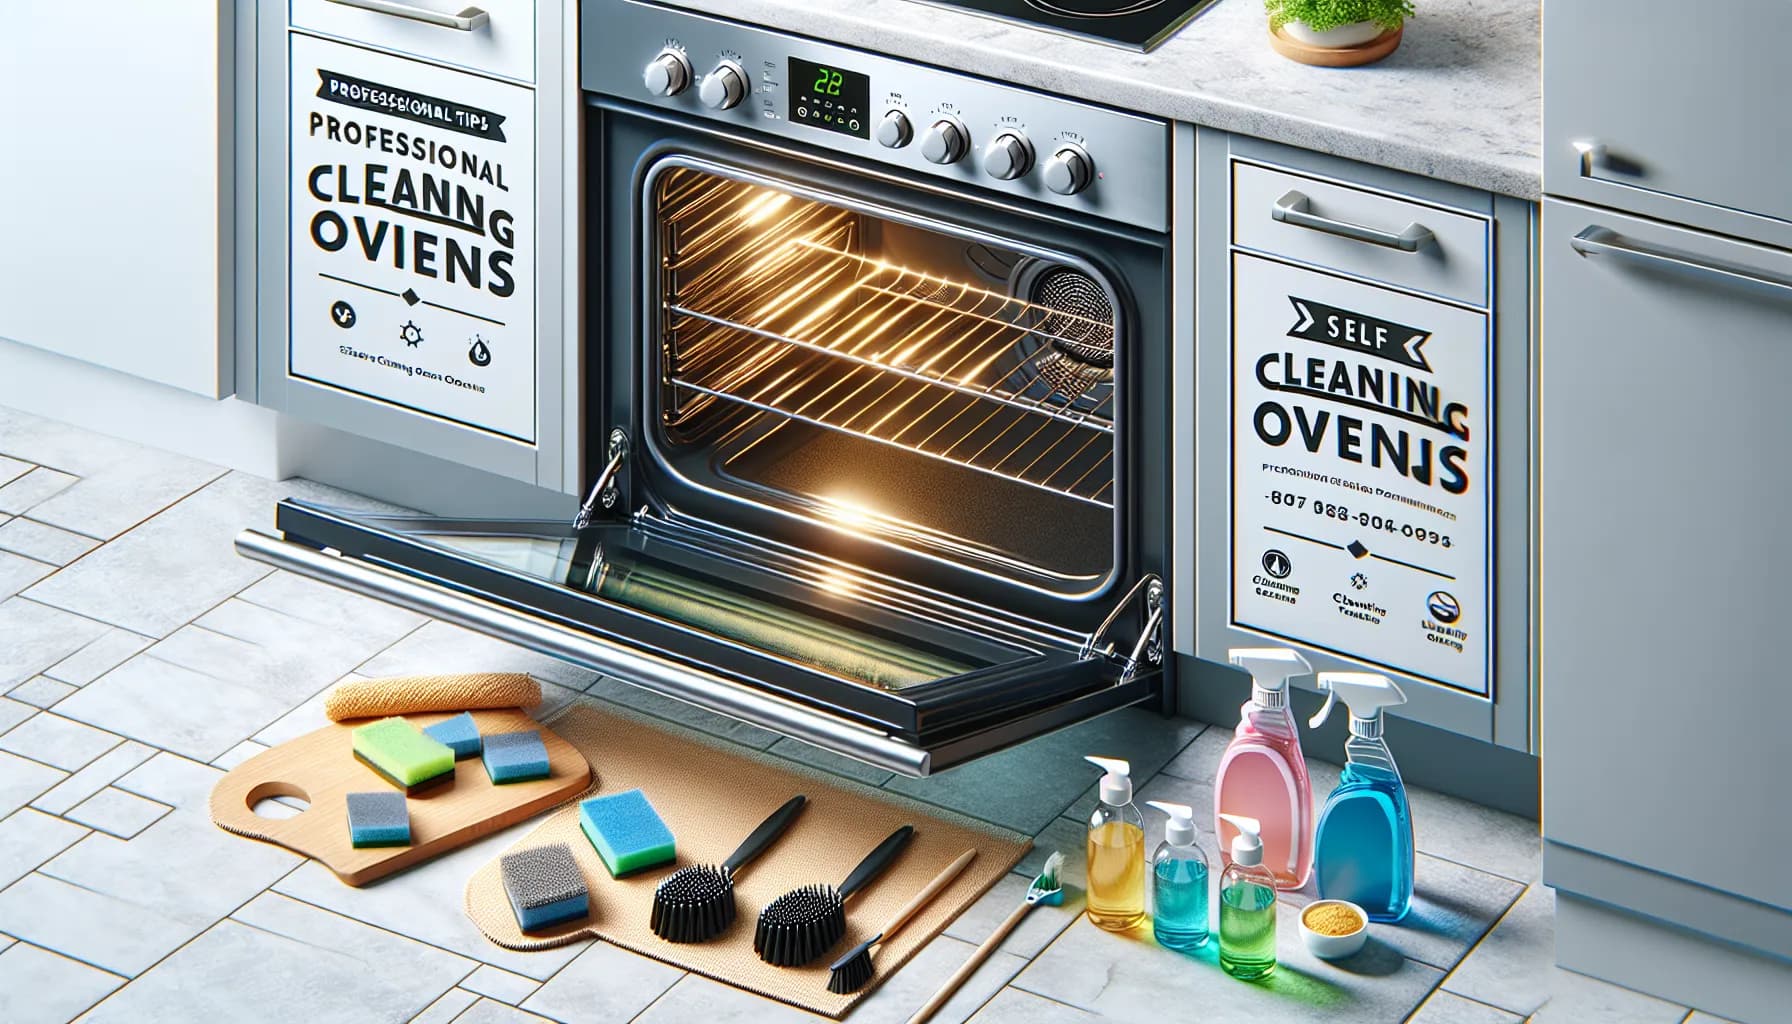 Shiny, clean oven with eco-friendly cleaning supplies. Professional tips for self-cleaning ovens.